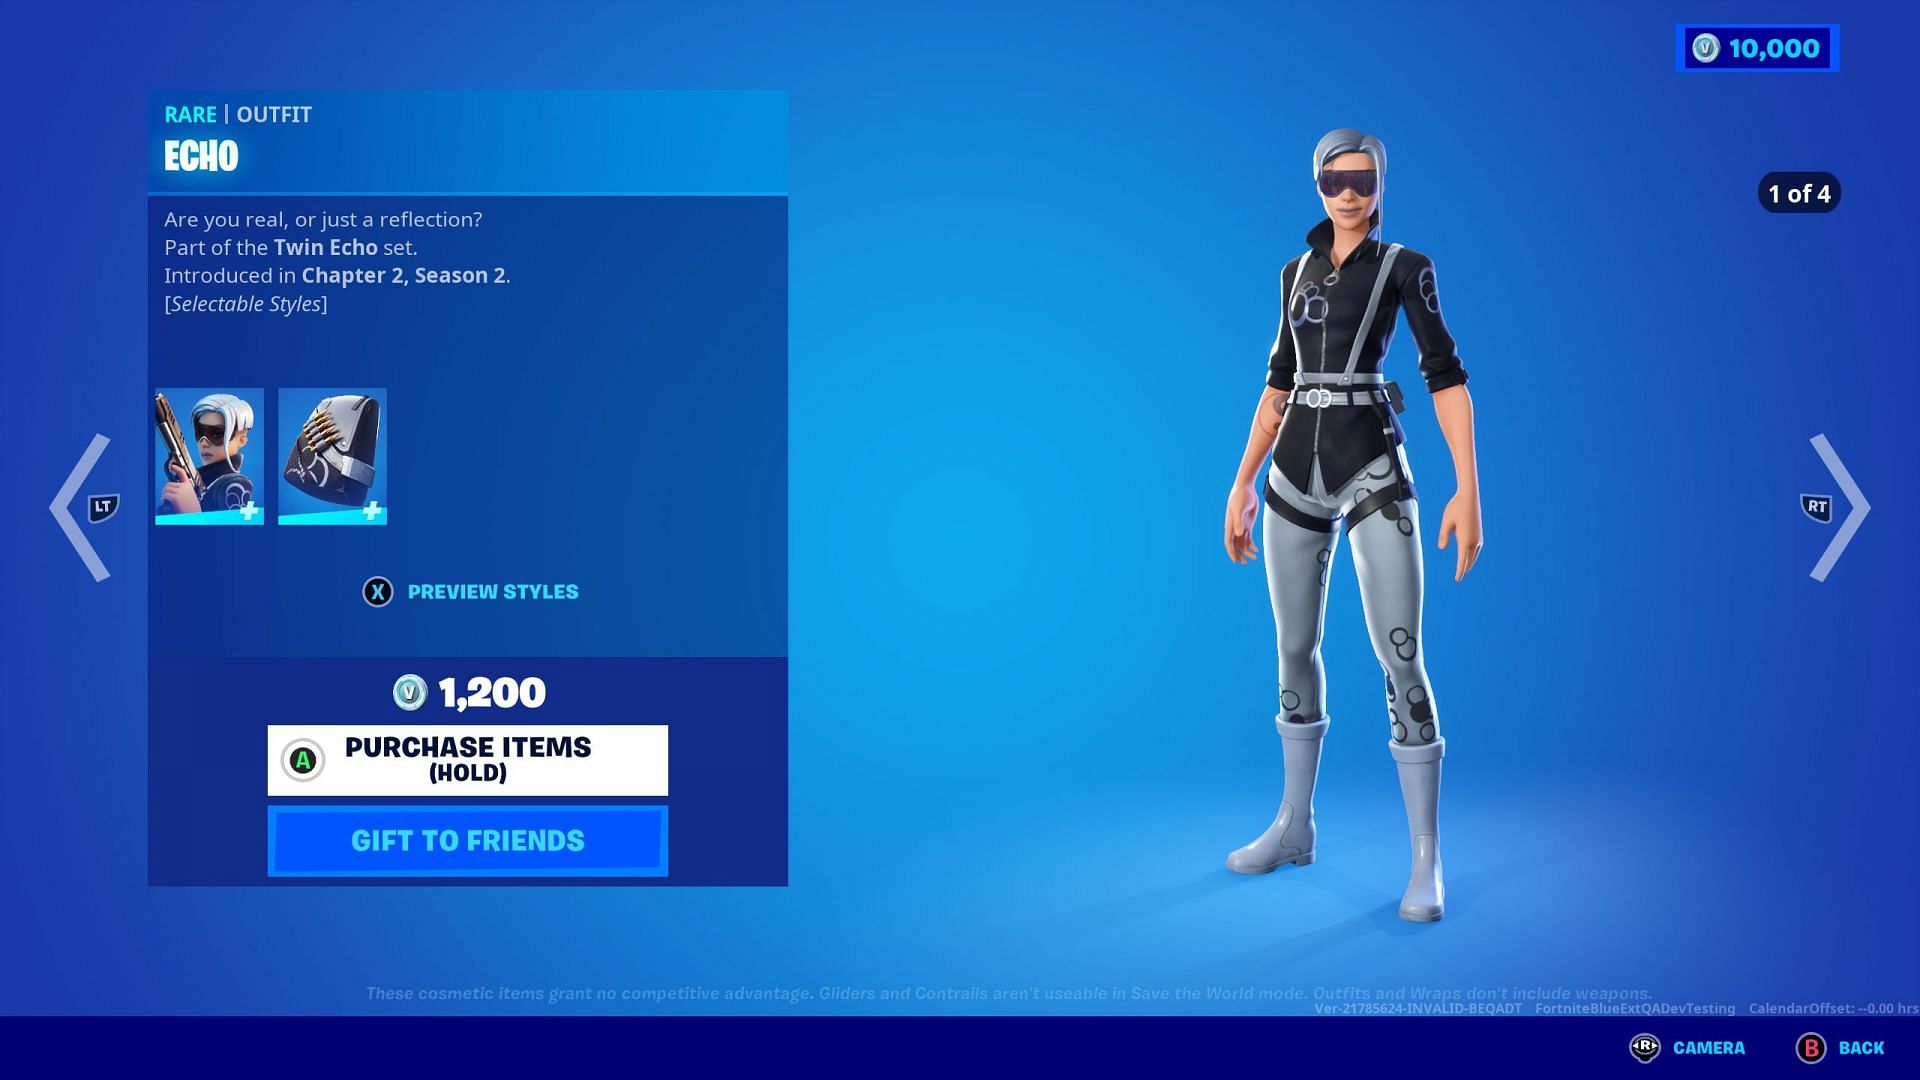 The latest Fortnite update has brought Item Shop changes (Image via Epic Games)